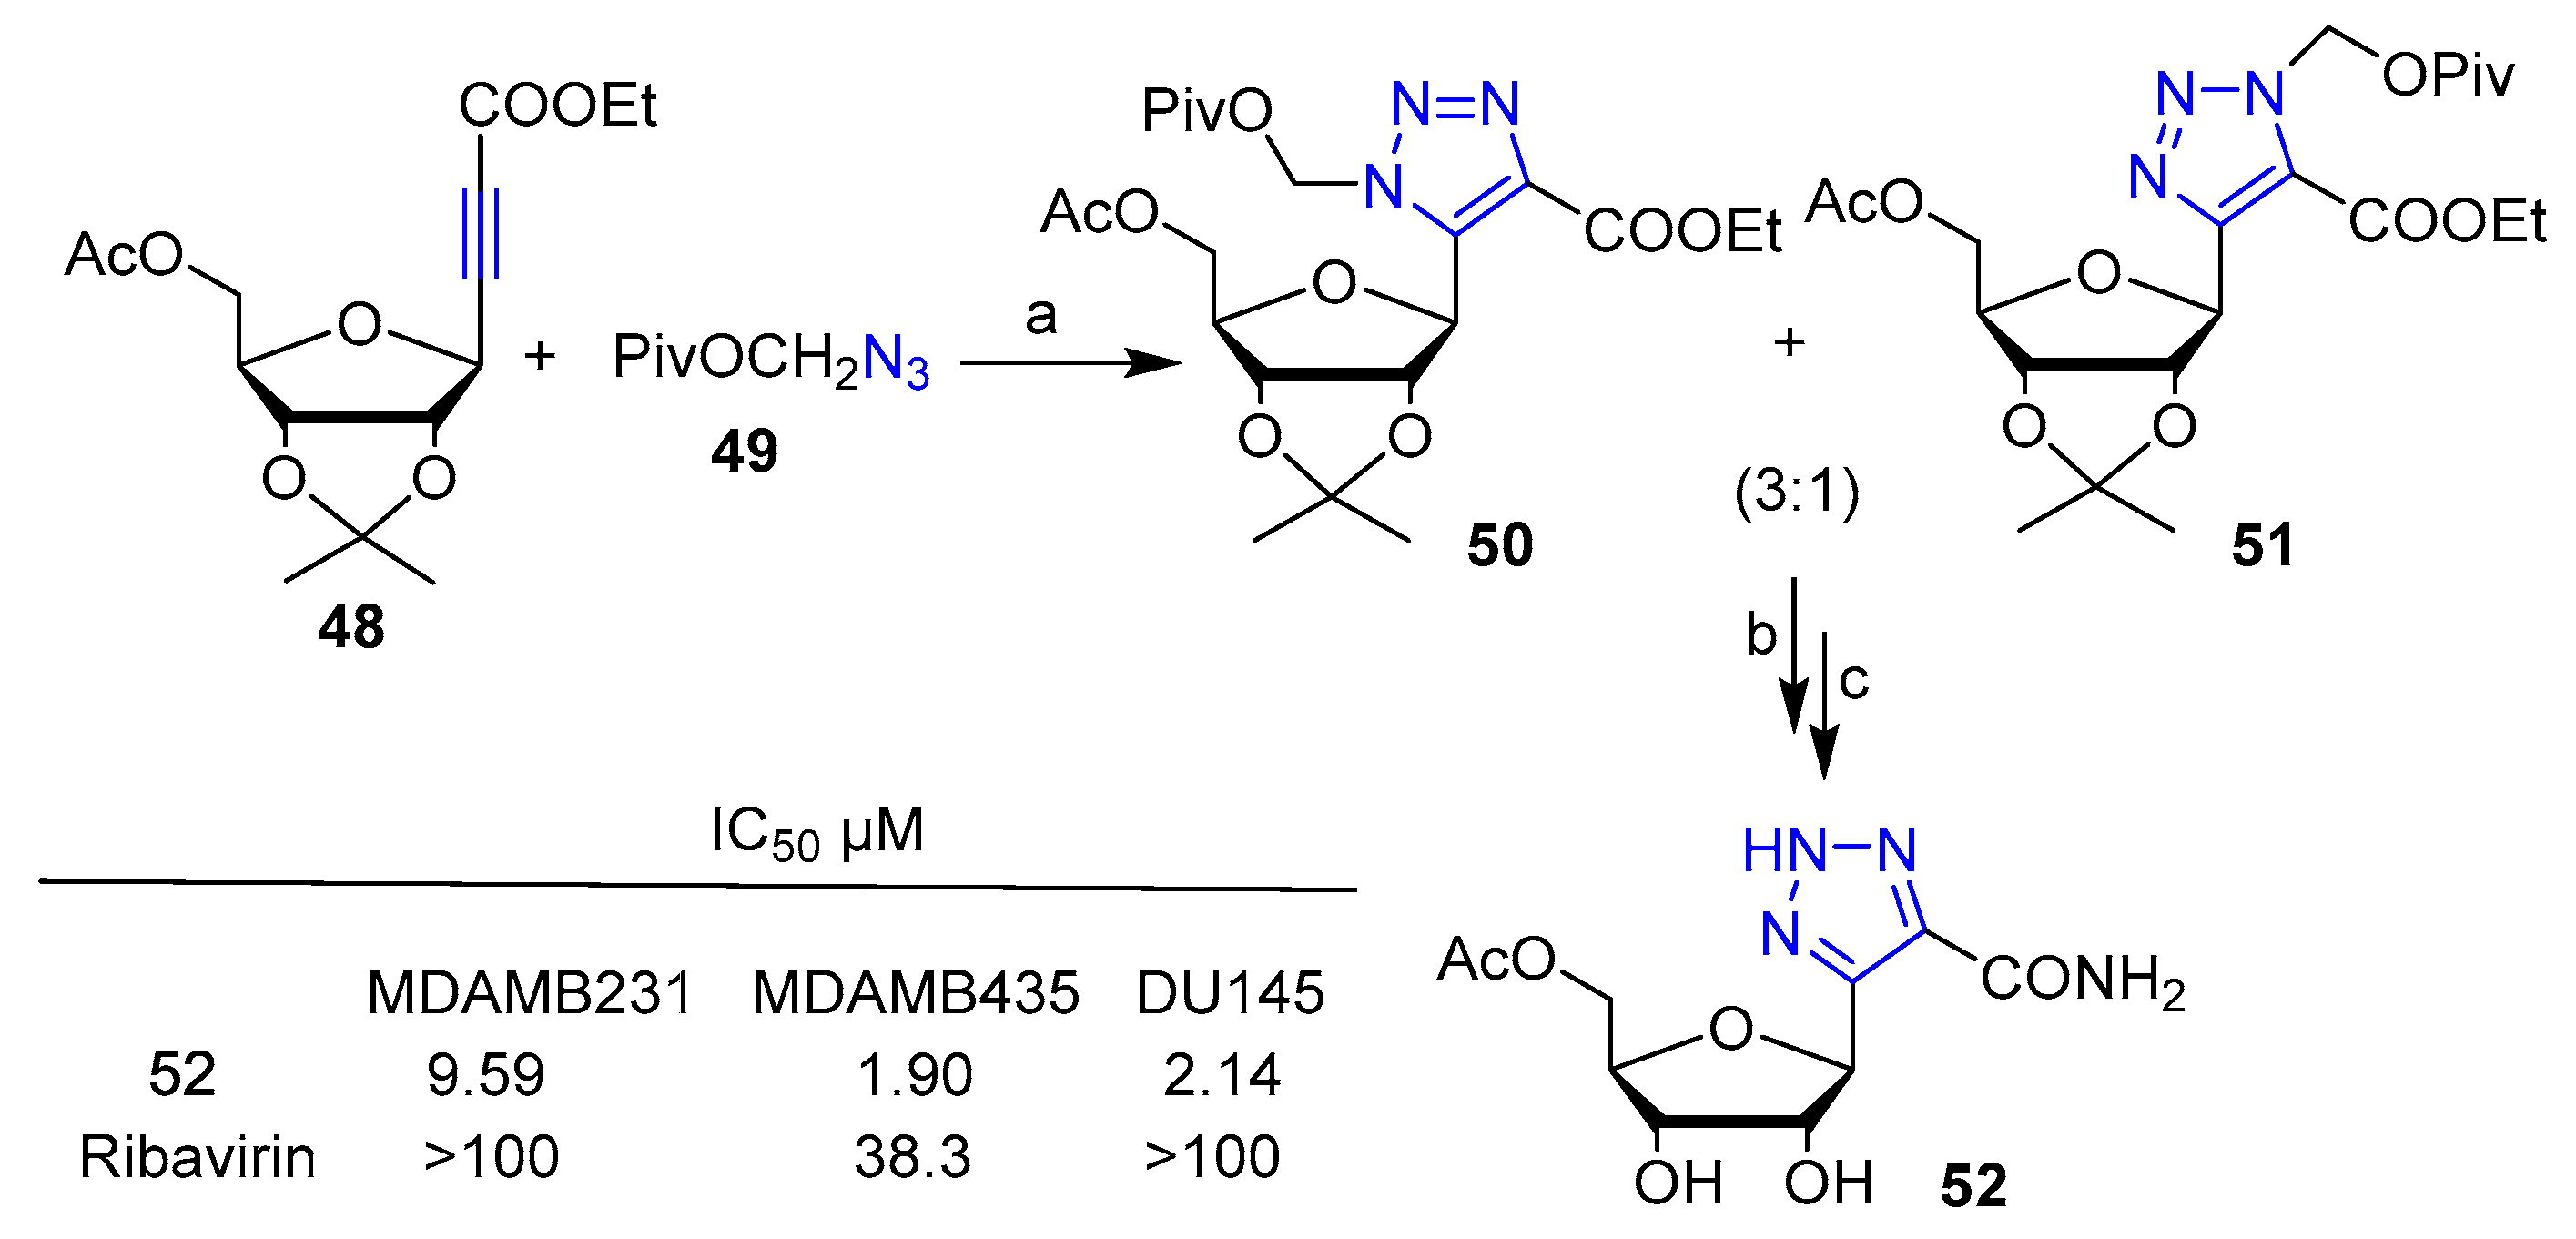 Reaction kinetics for the reaction of 1e/c with NMM (A) HPLC stack